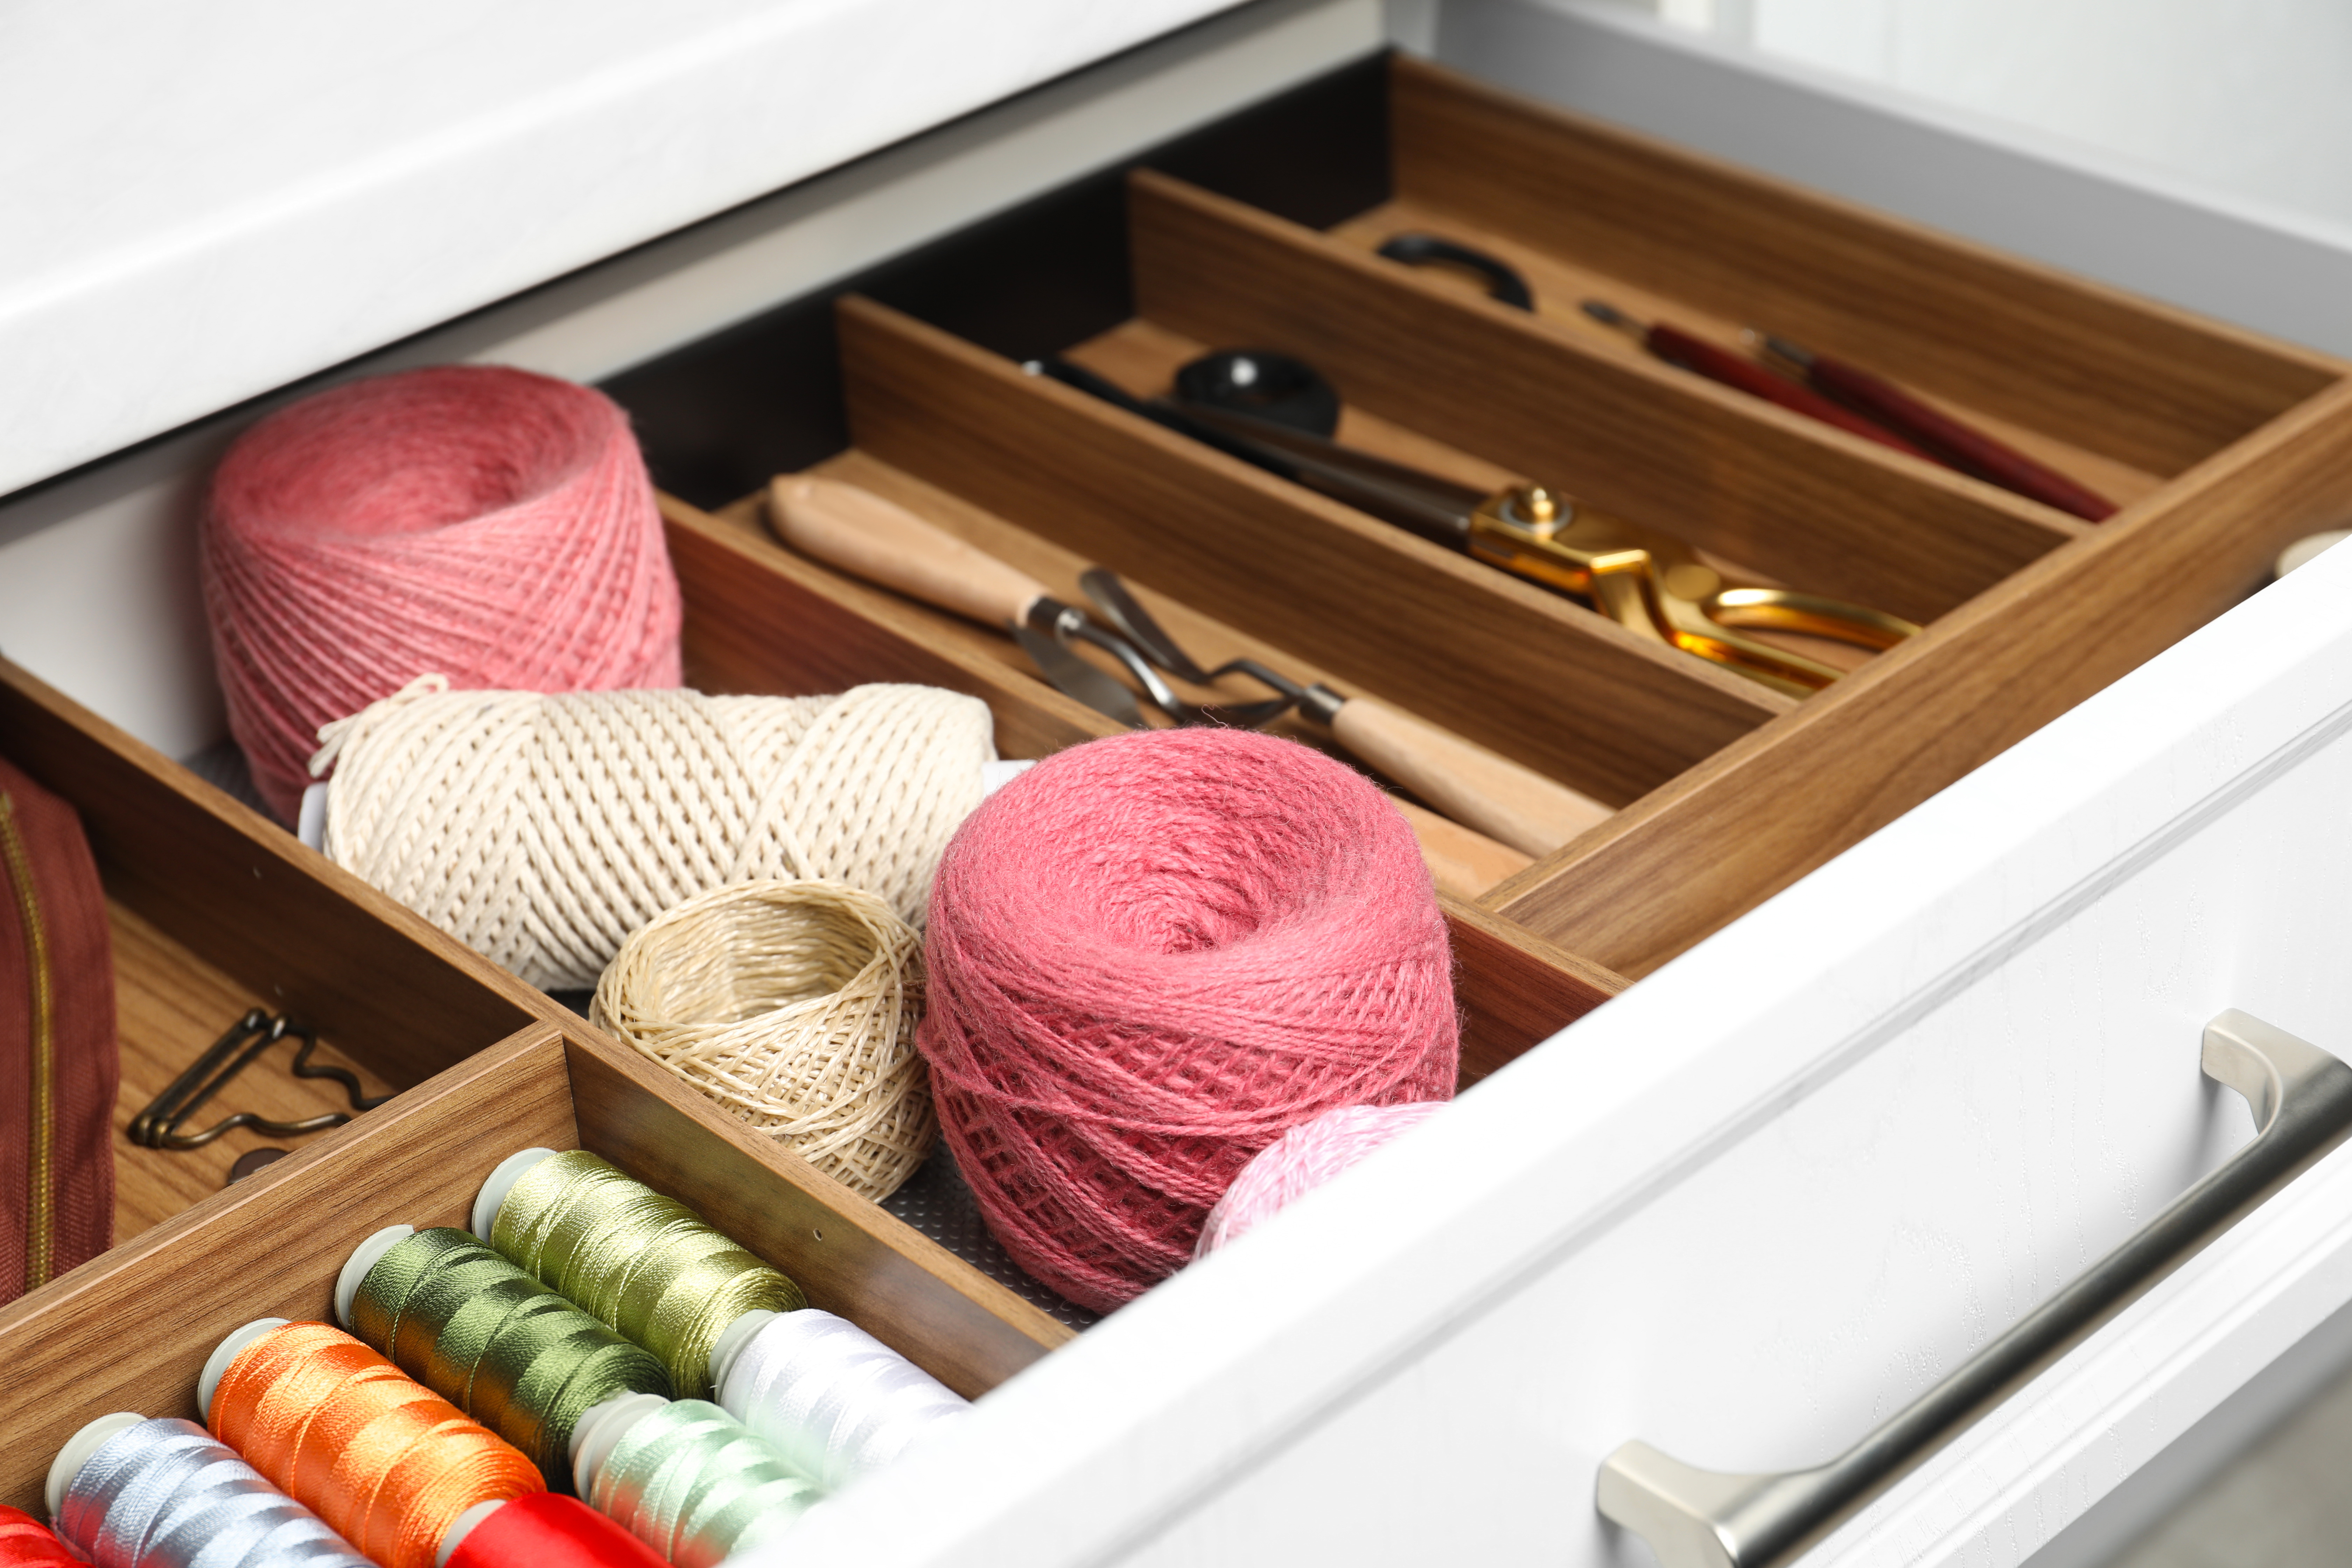 Looking to organize your home? Try these 5 versatile items